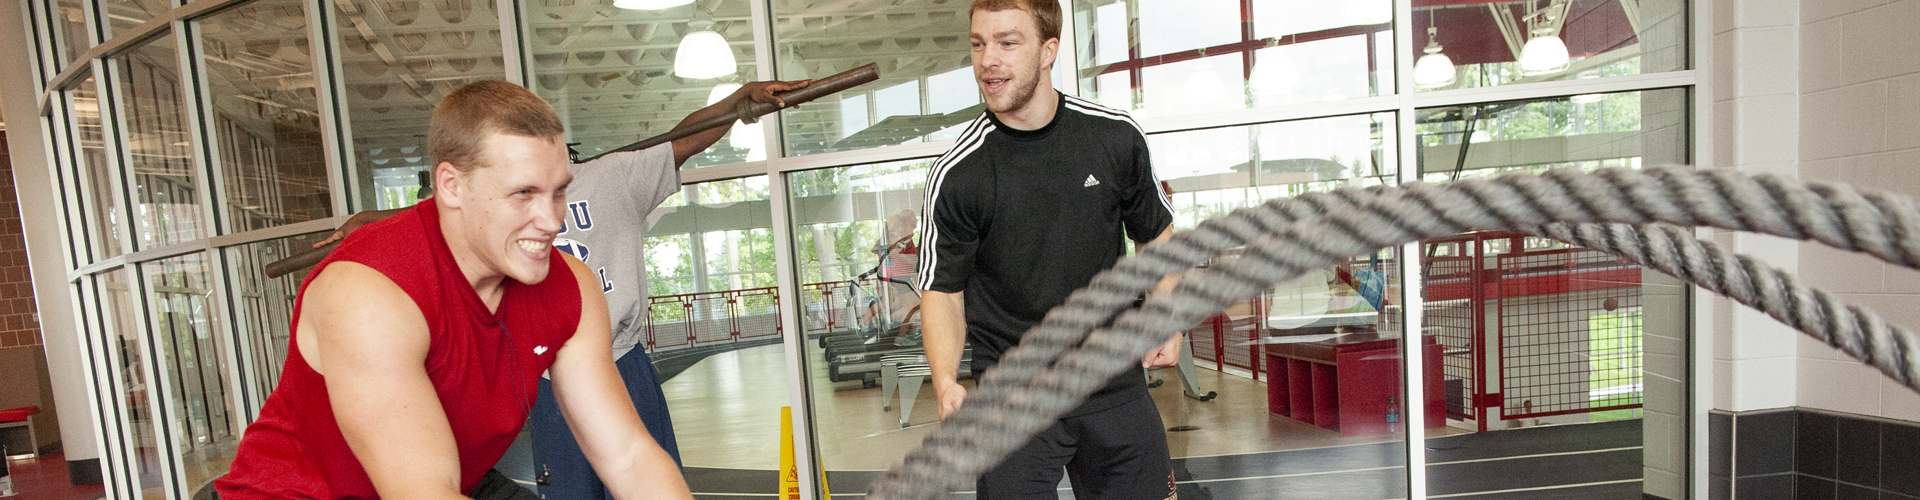 Student working out with ropes as a trainer encourages him